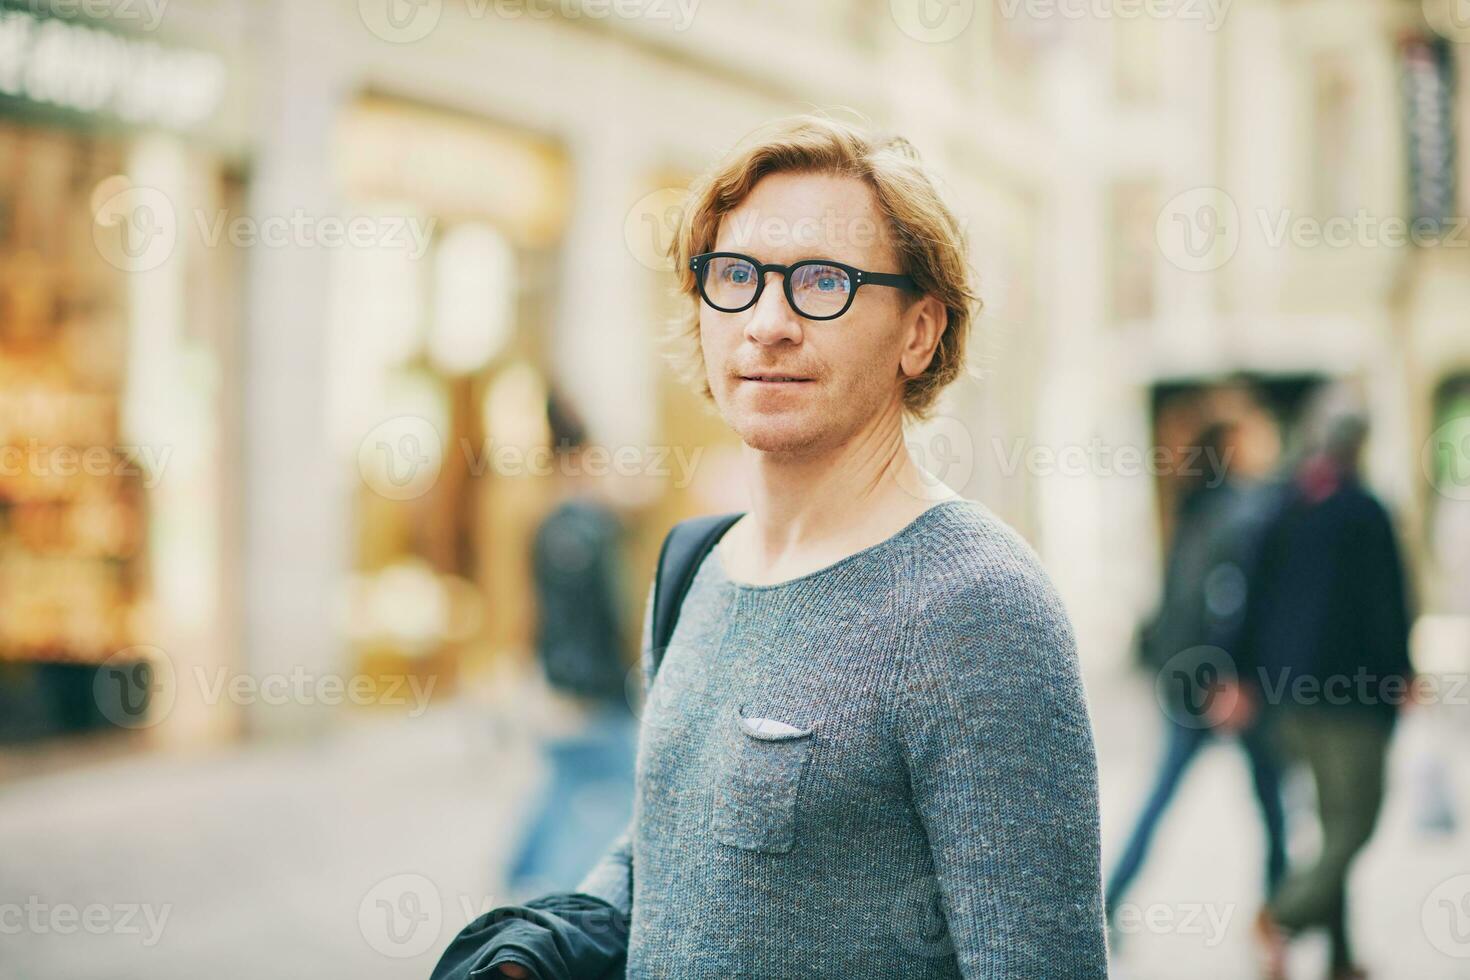 Outdoor portrait of handsome red-haired man wearing eyeglasses posing on city street photo